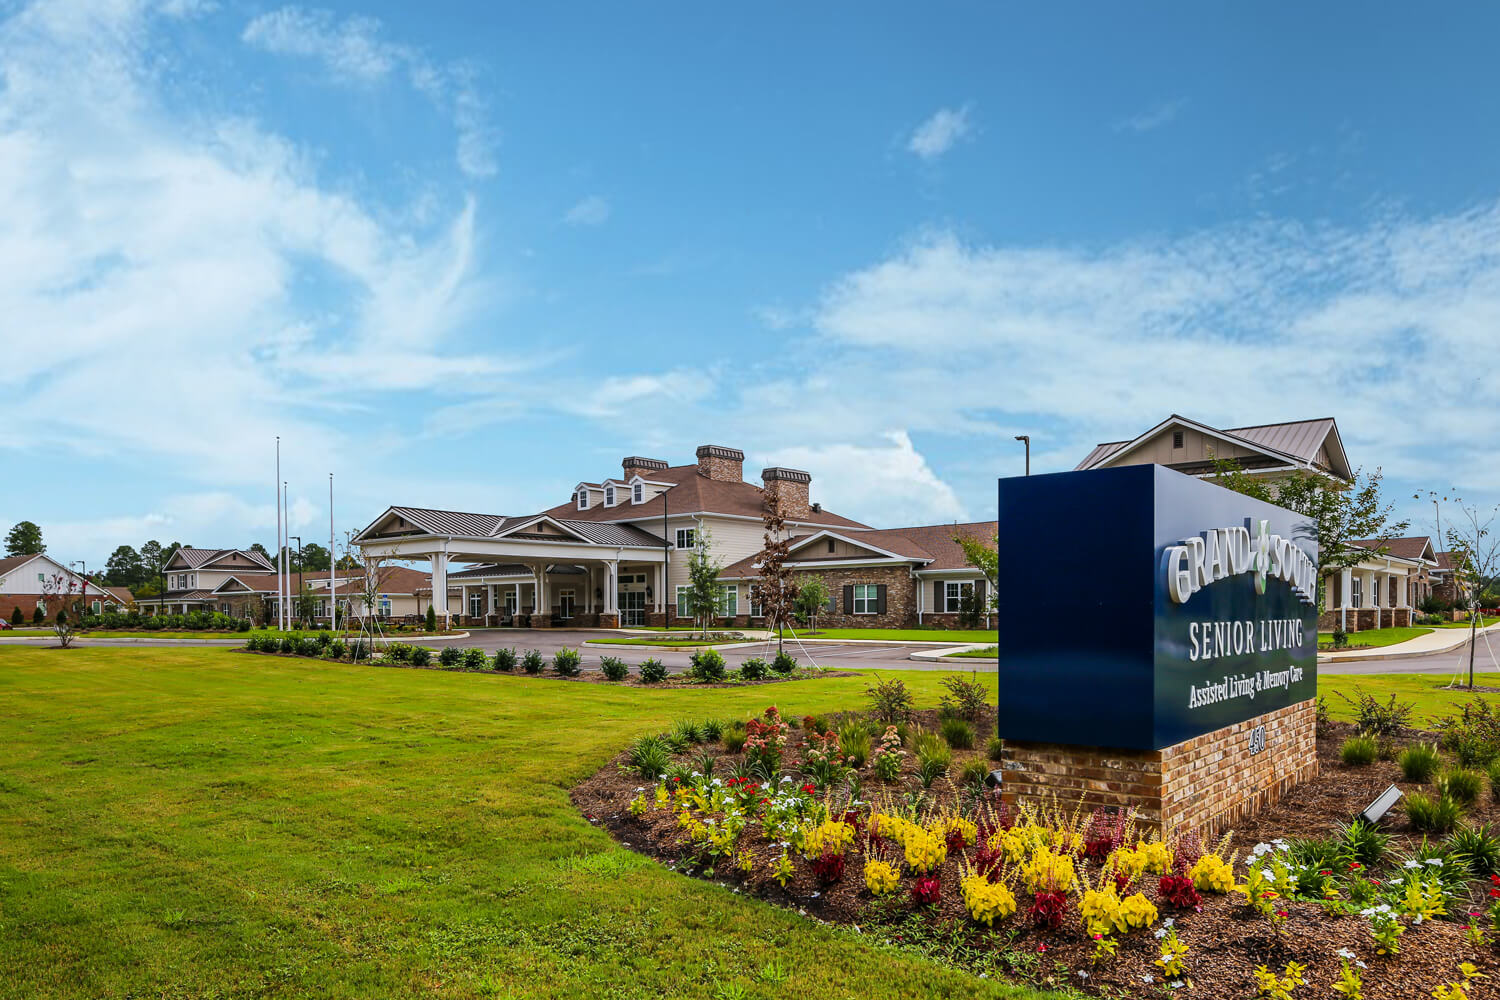 Grand South Senior Living - Entry Signage - Designed by Foshee Architecture